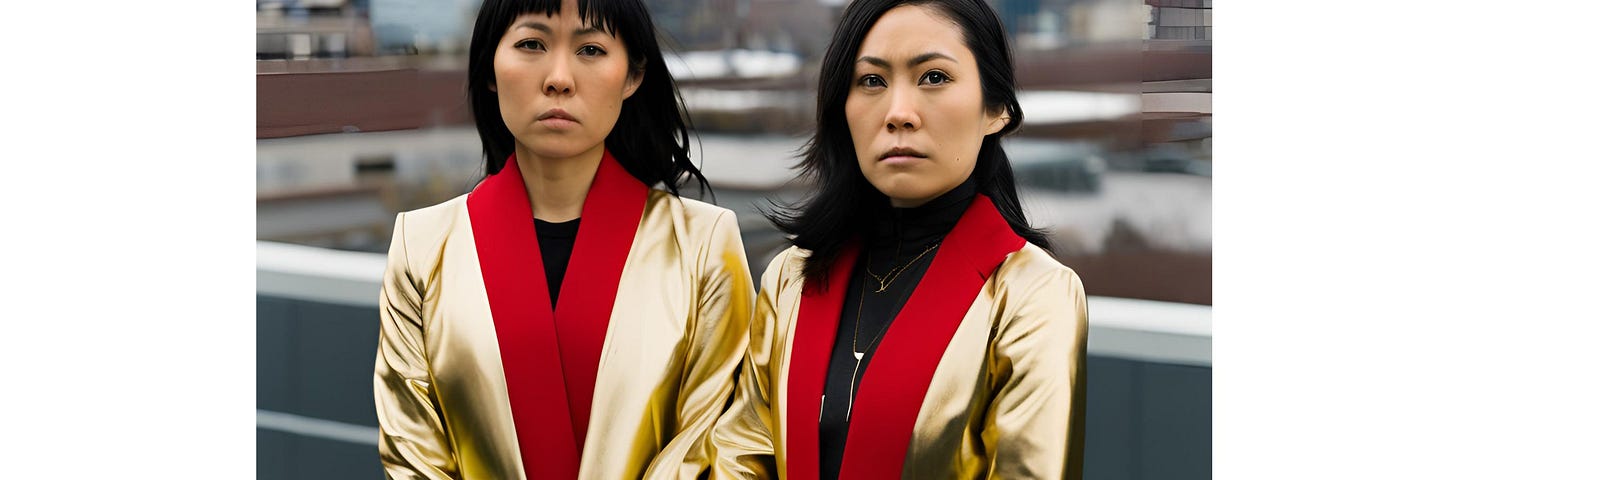 Two Japanese-American women, thirty-three years old, wearing gold-colored long jackets with red lapels, looking very serious, arms folded, in the background is a dark cloudy futuristic city